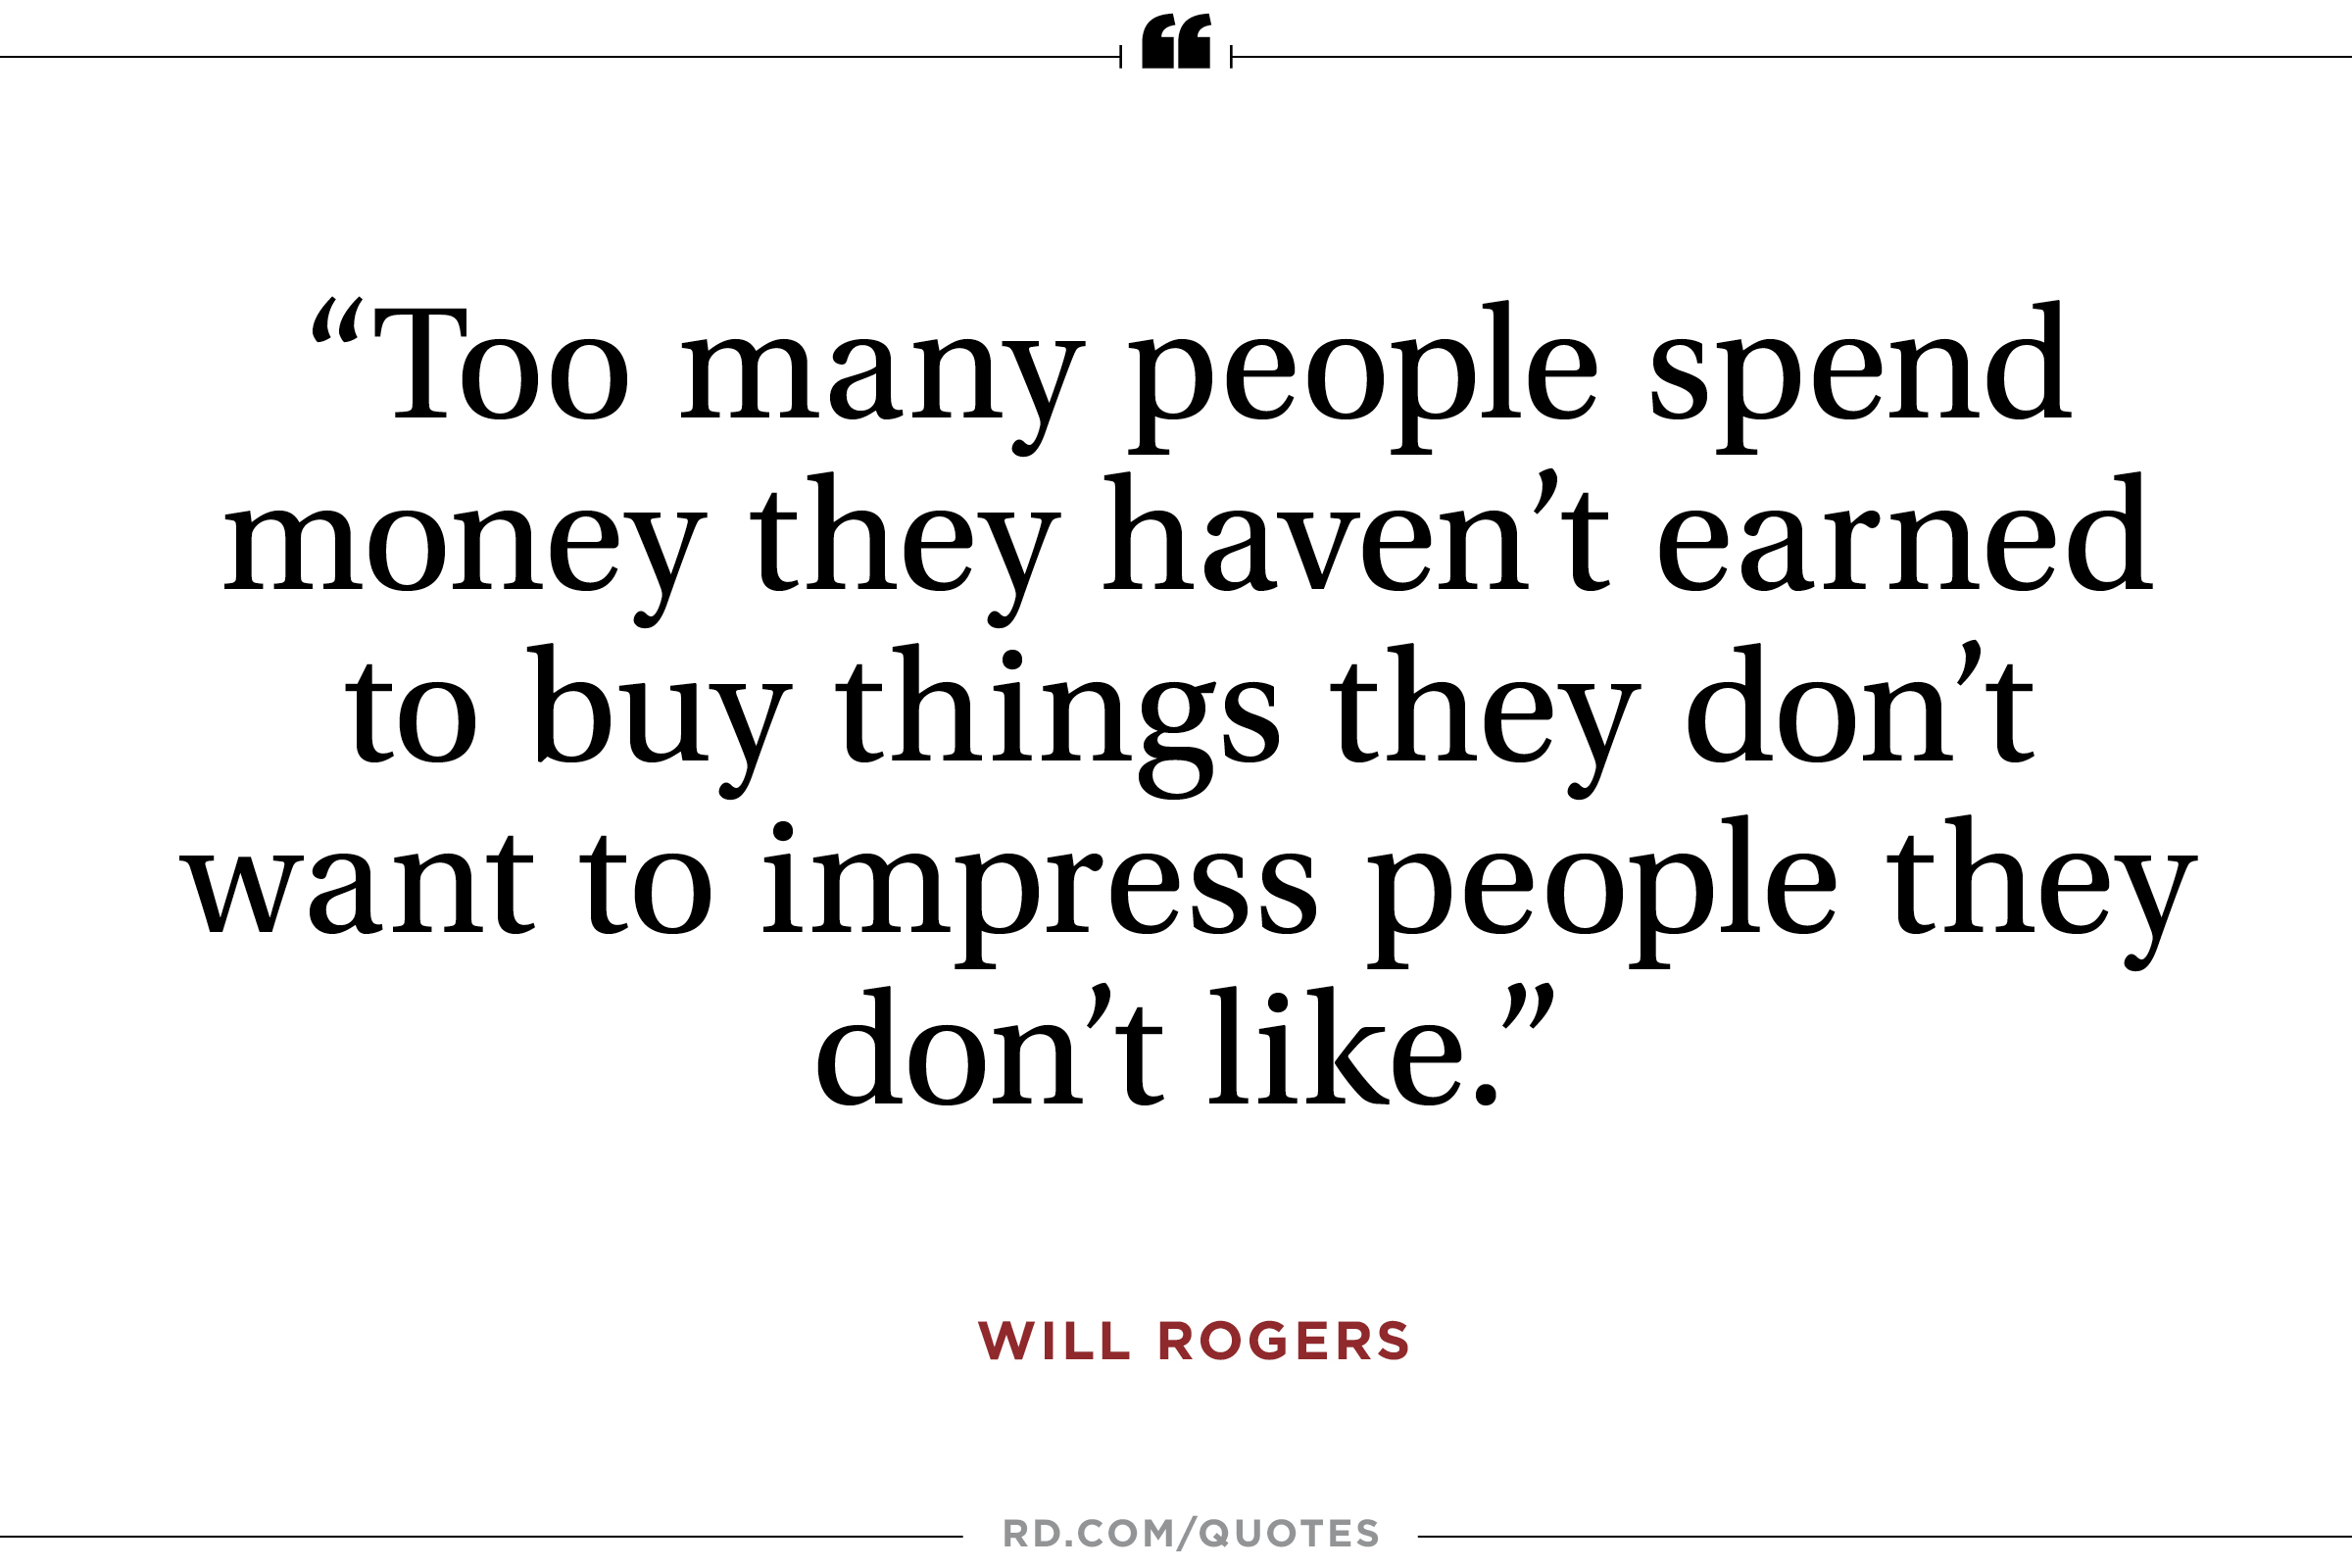 Too many people spend money they haven't earned to buy things they don't want to impress people they don't like. Will Rogers